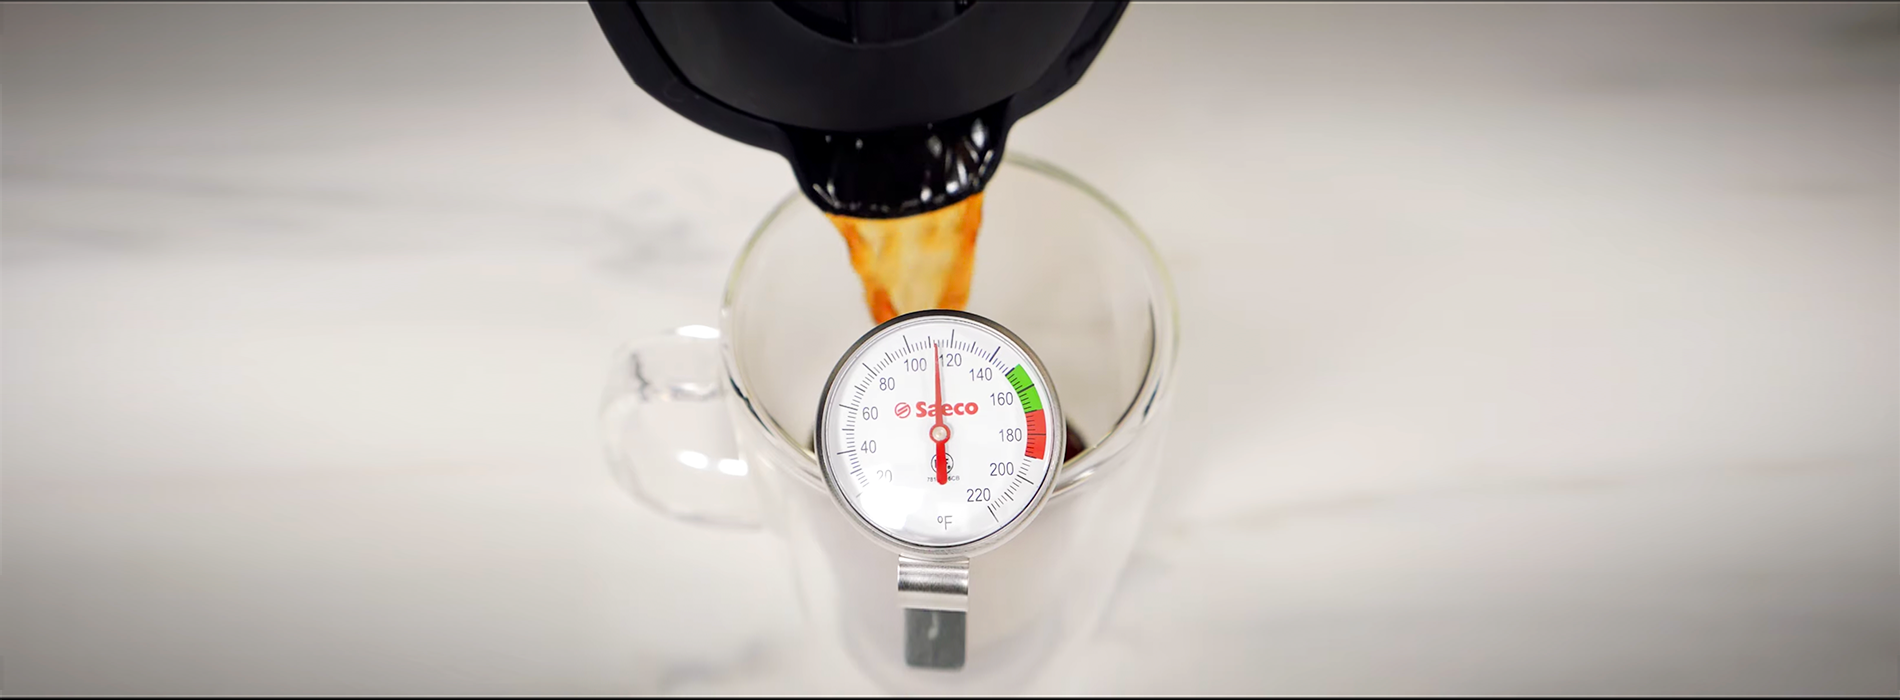 How Phase Change Materials Can Keep Your Coffee Hot